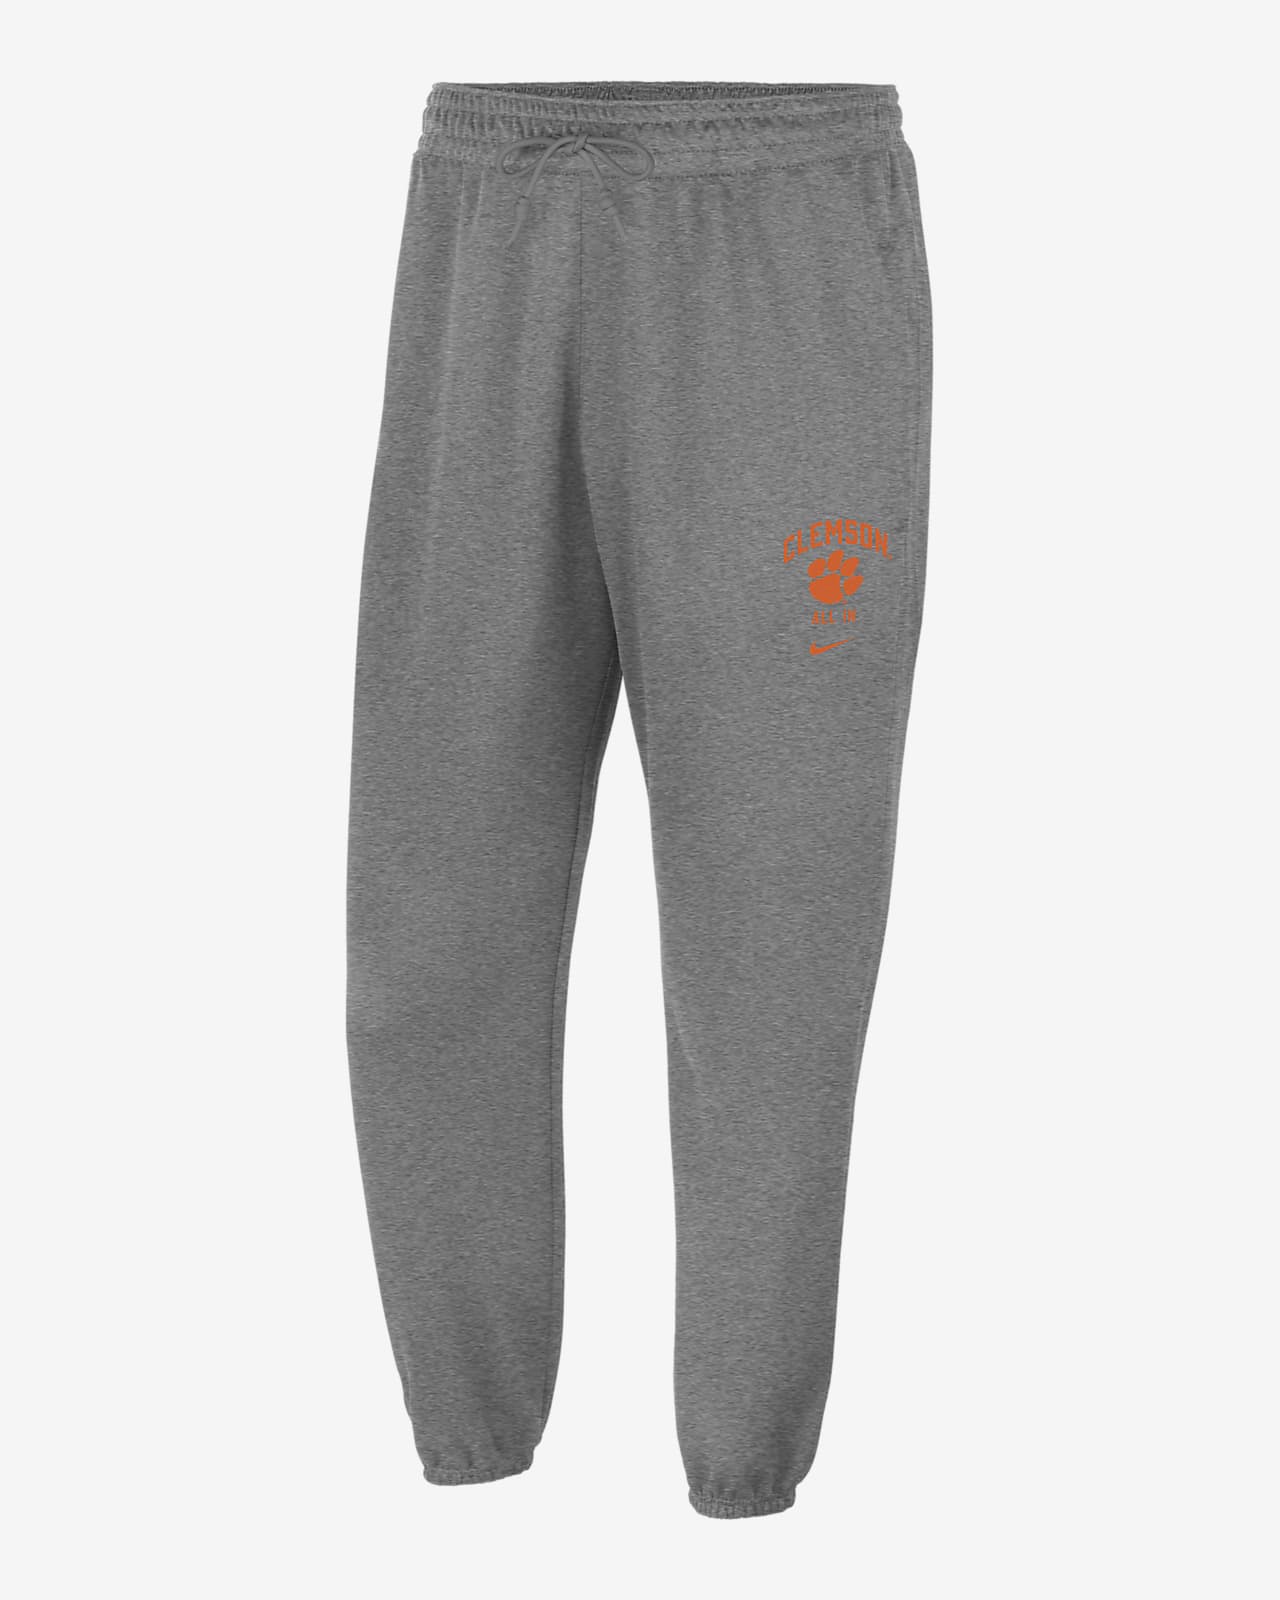 Clemson Standard Issue Men's Nike College Joggers